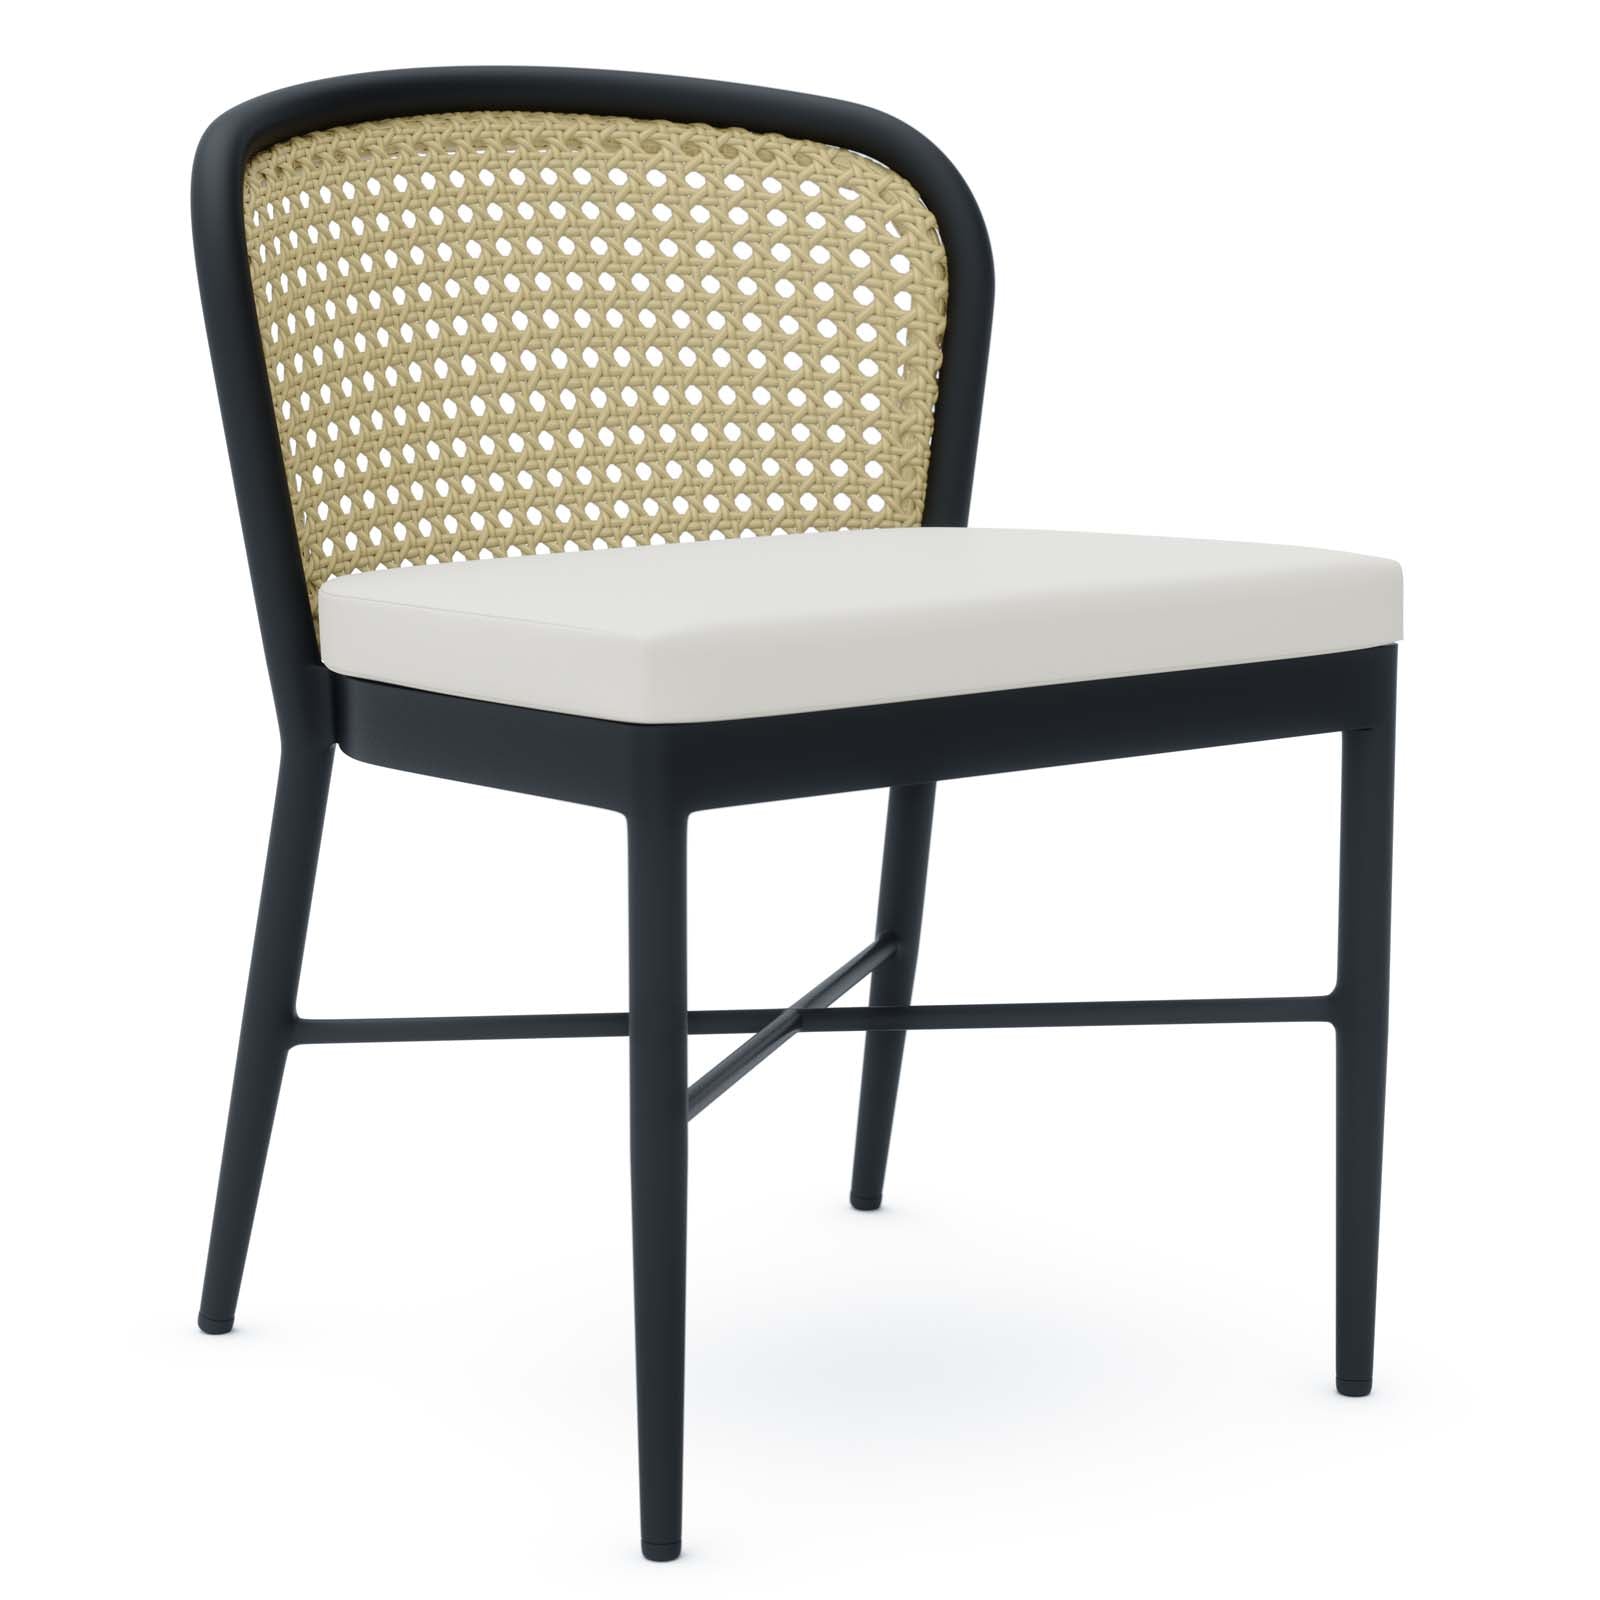 Melbourne Outdoor Patio Dining Side Chair-Outdoor Chair-Modway-Wall2Wall Furnishings